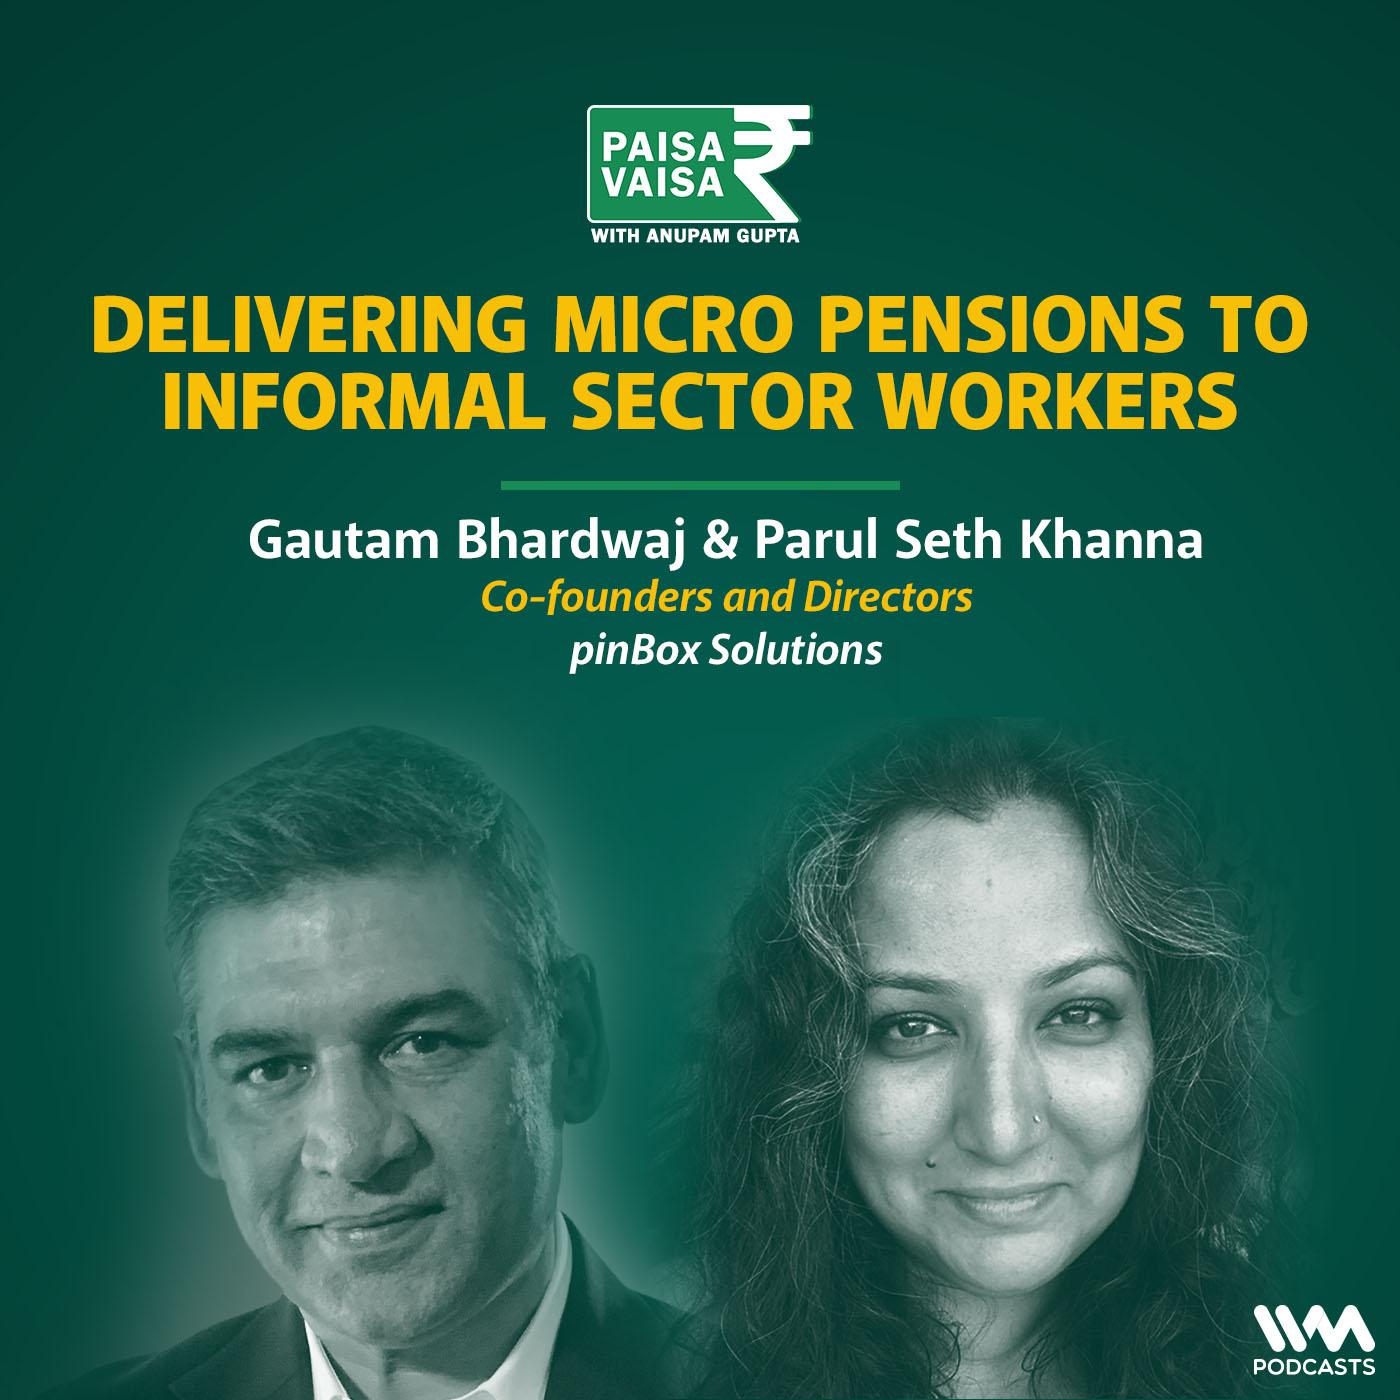 Delivering Micro Pensions to Informal Sector Workers